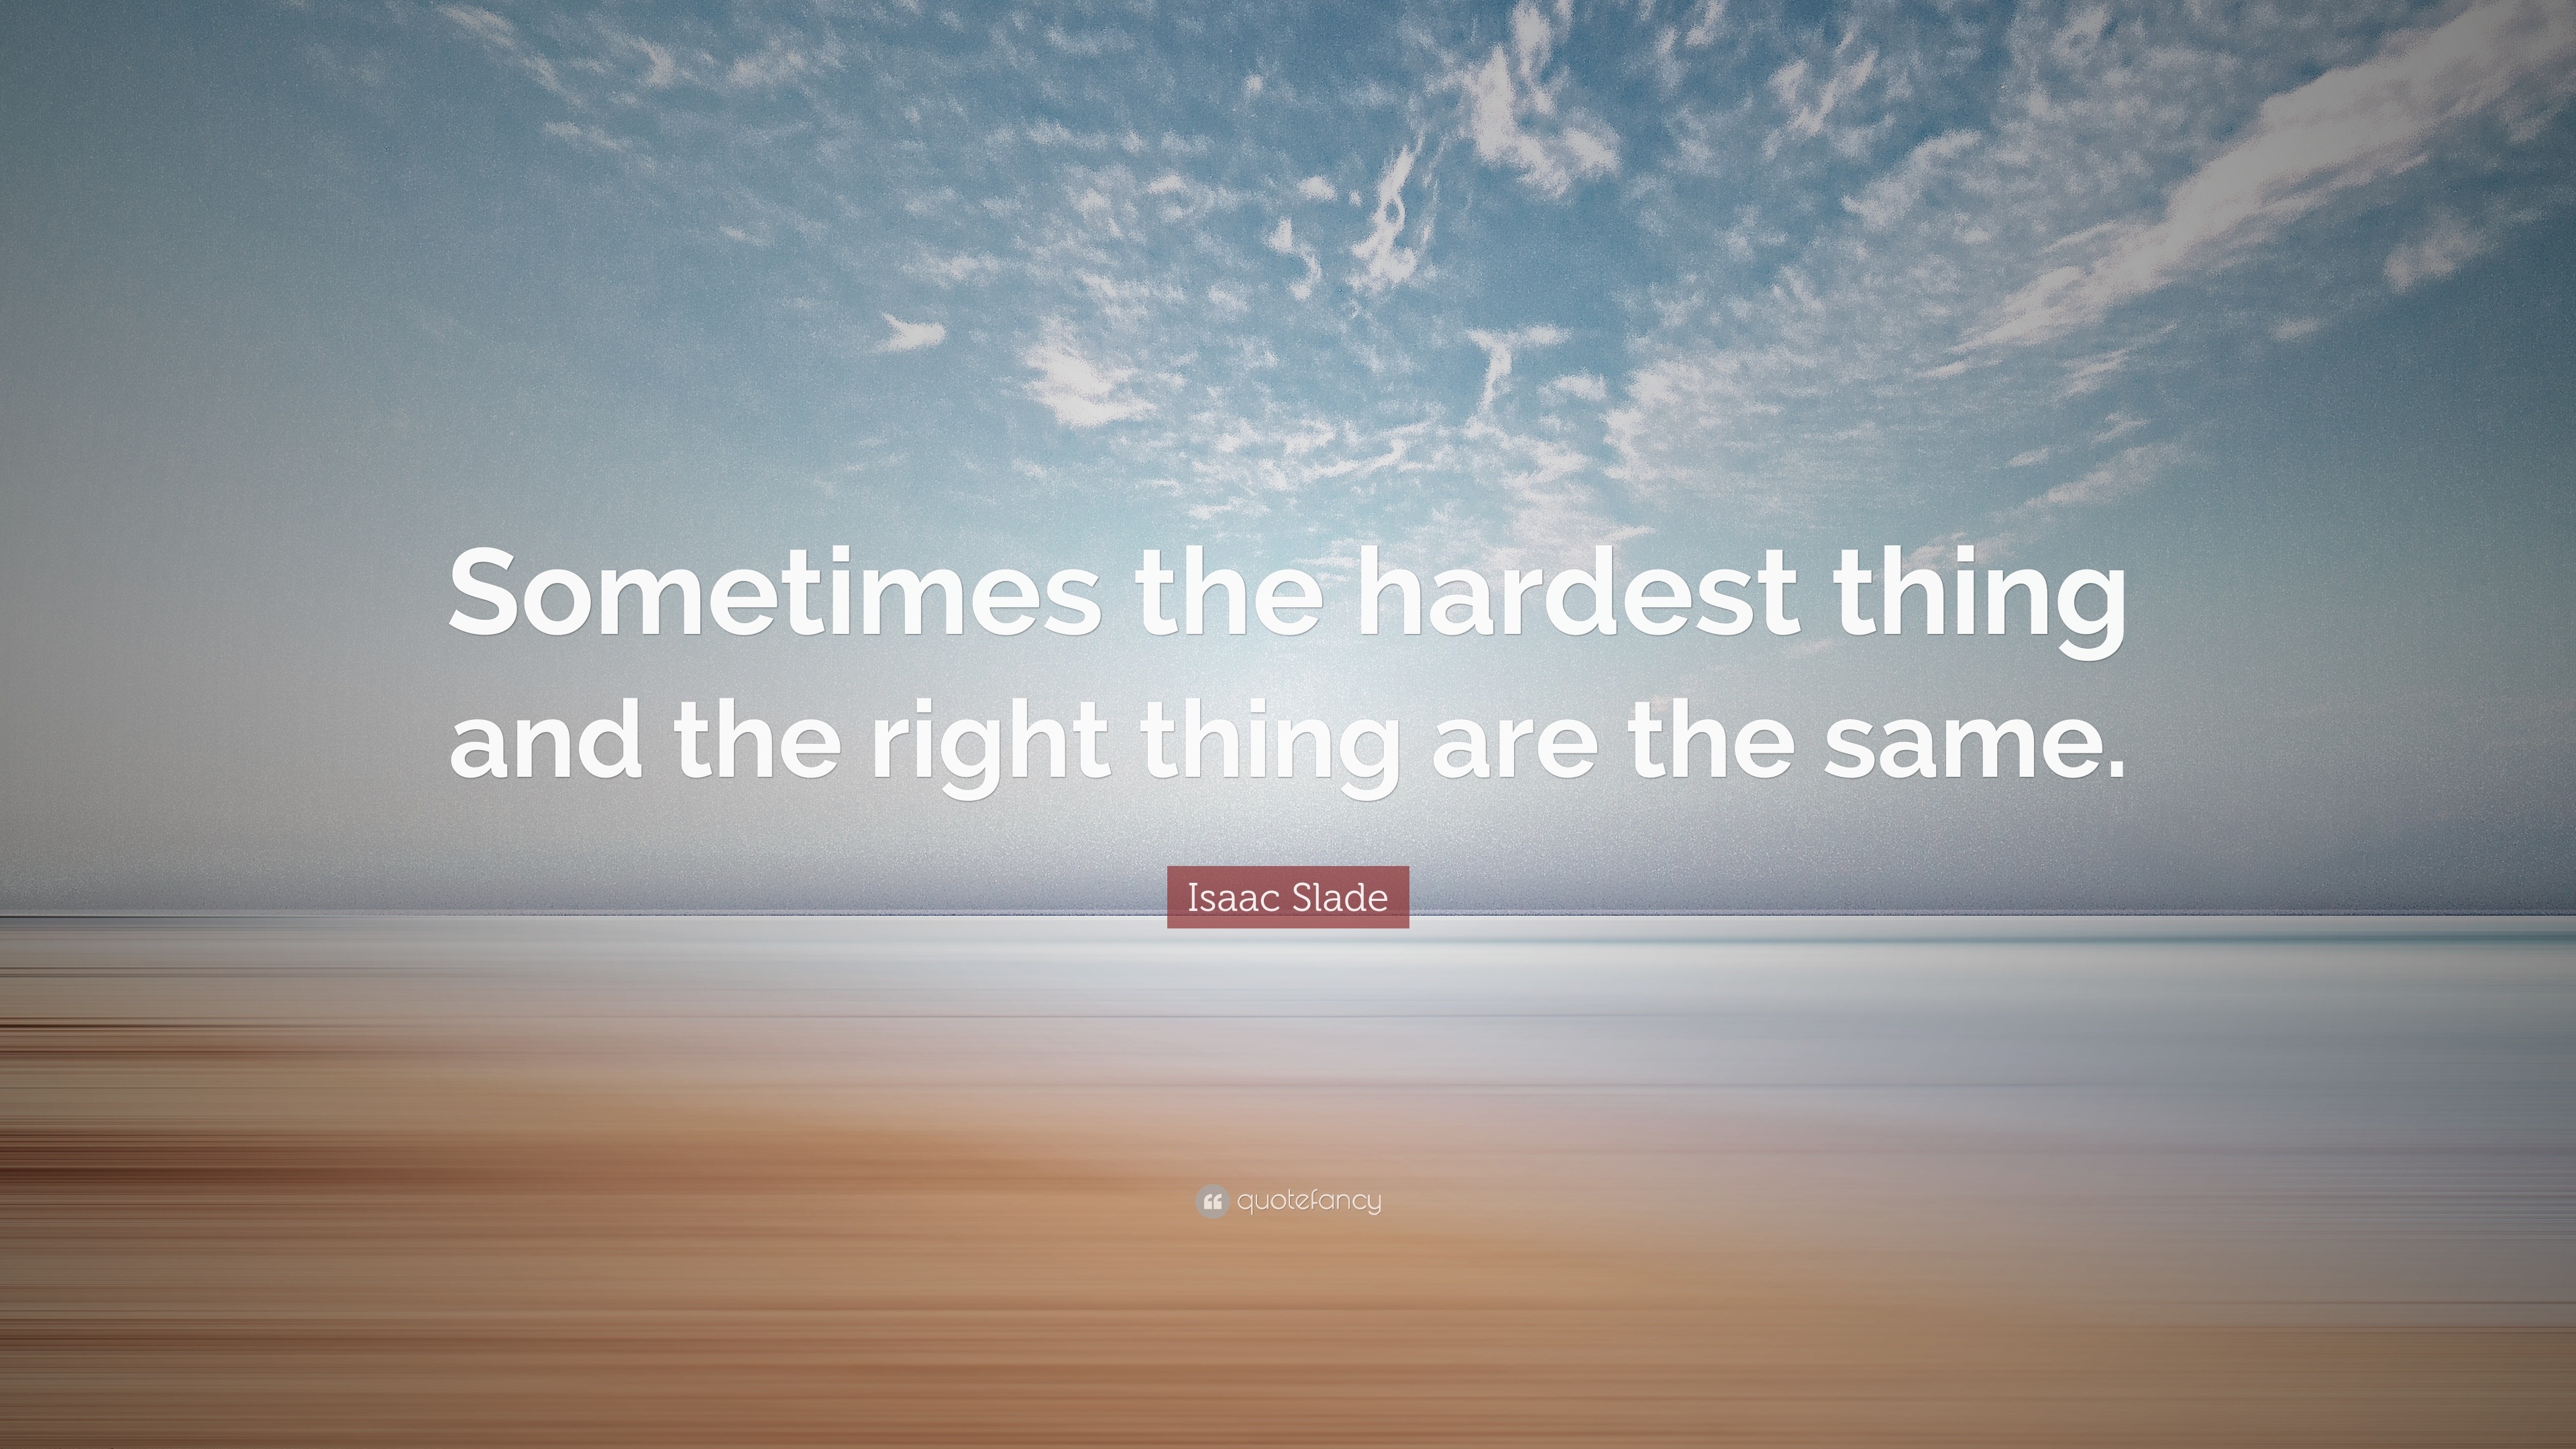 Isaac Slade Quote: “Sometimes the hardest thing and the right thing are